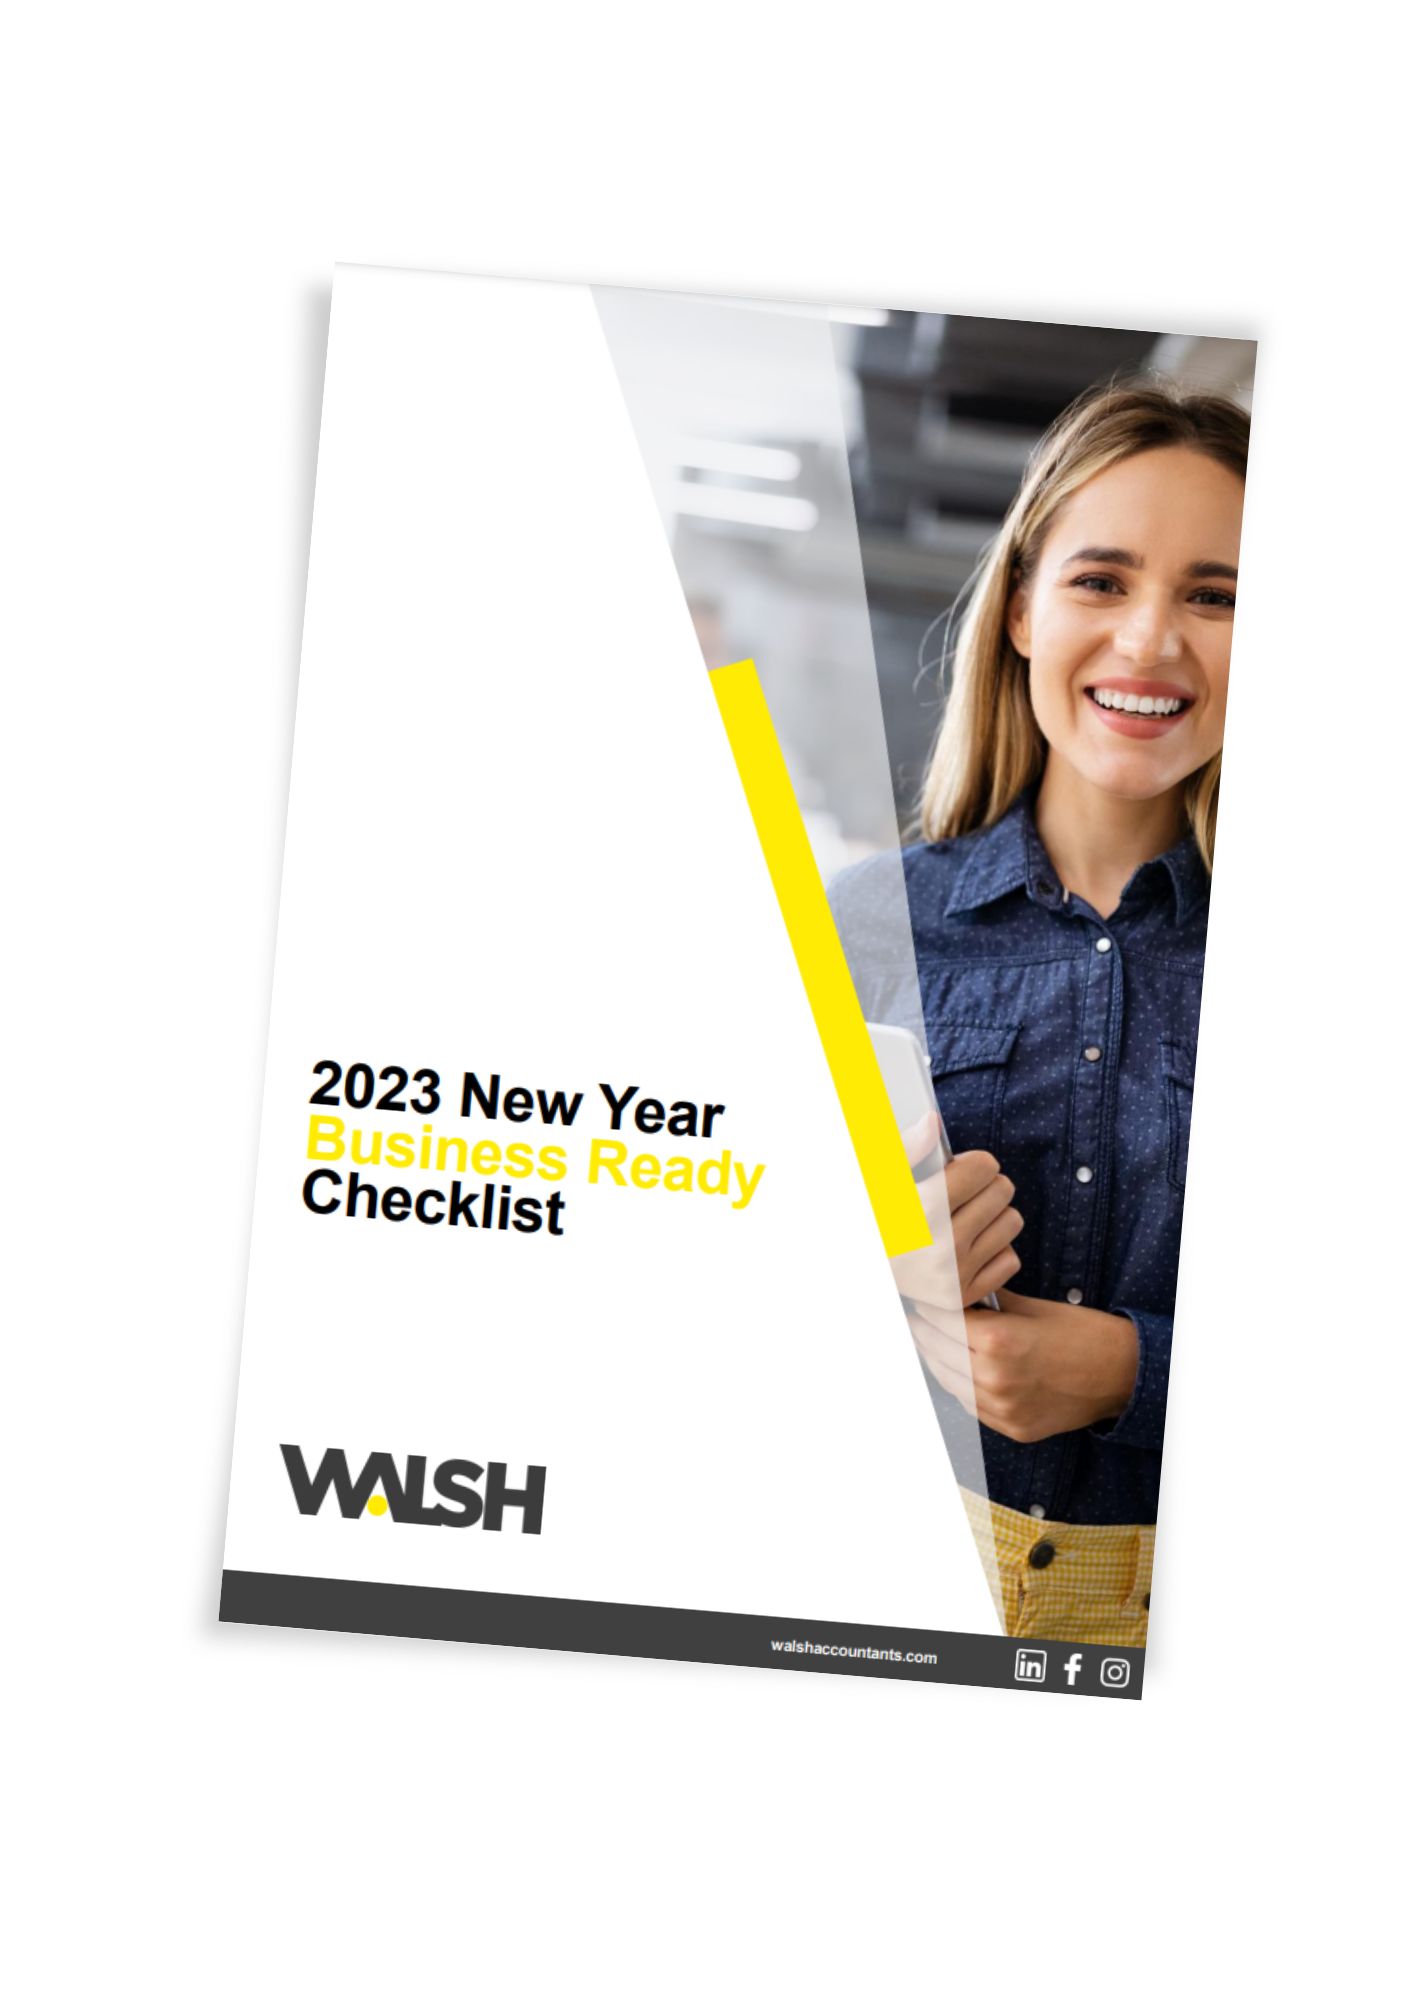 2023 New Year Business Ready Checklist Cover